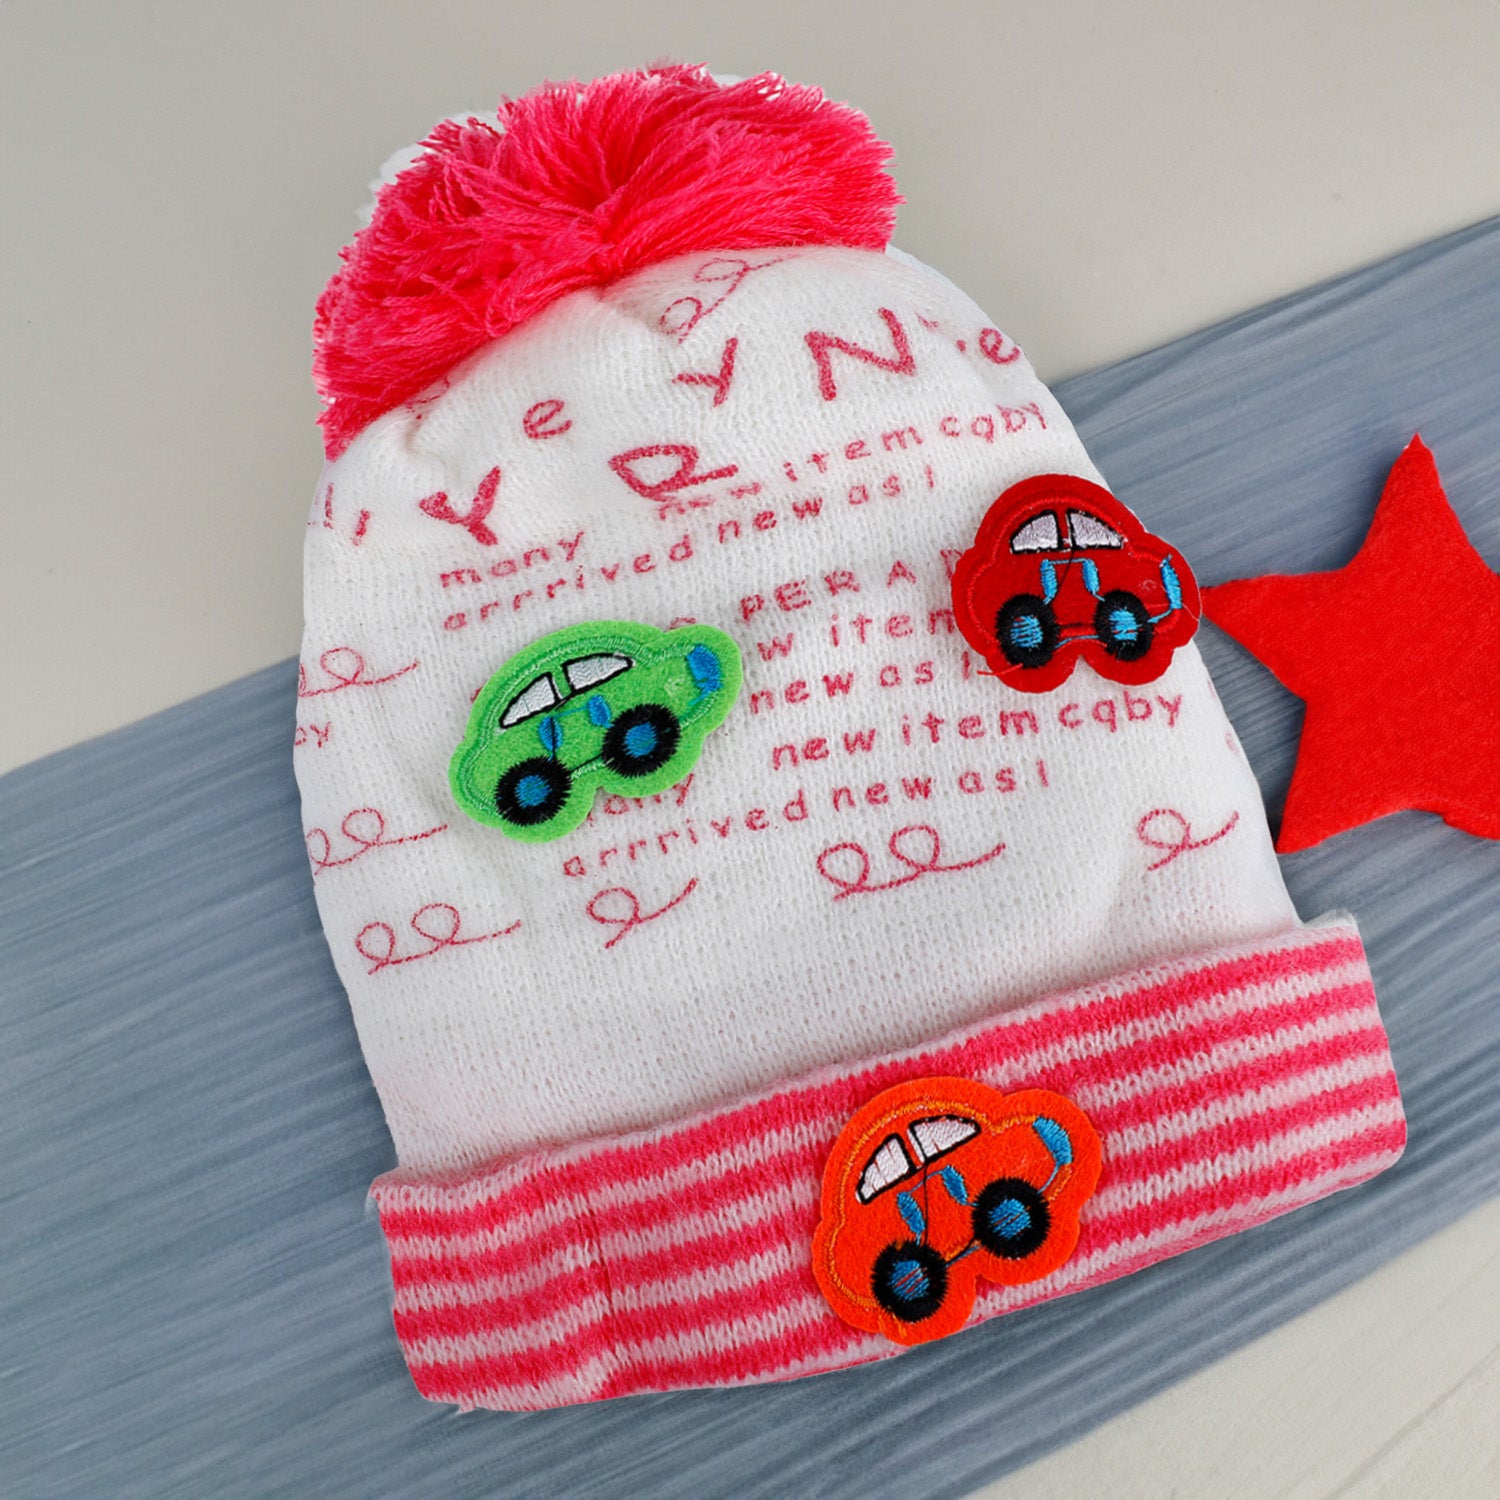 Baby Moo Car Pom Pom Breathable Beanie Warm Knitted Woollen Cap - Pink